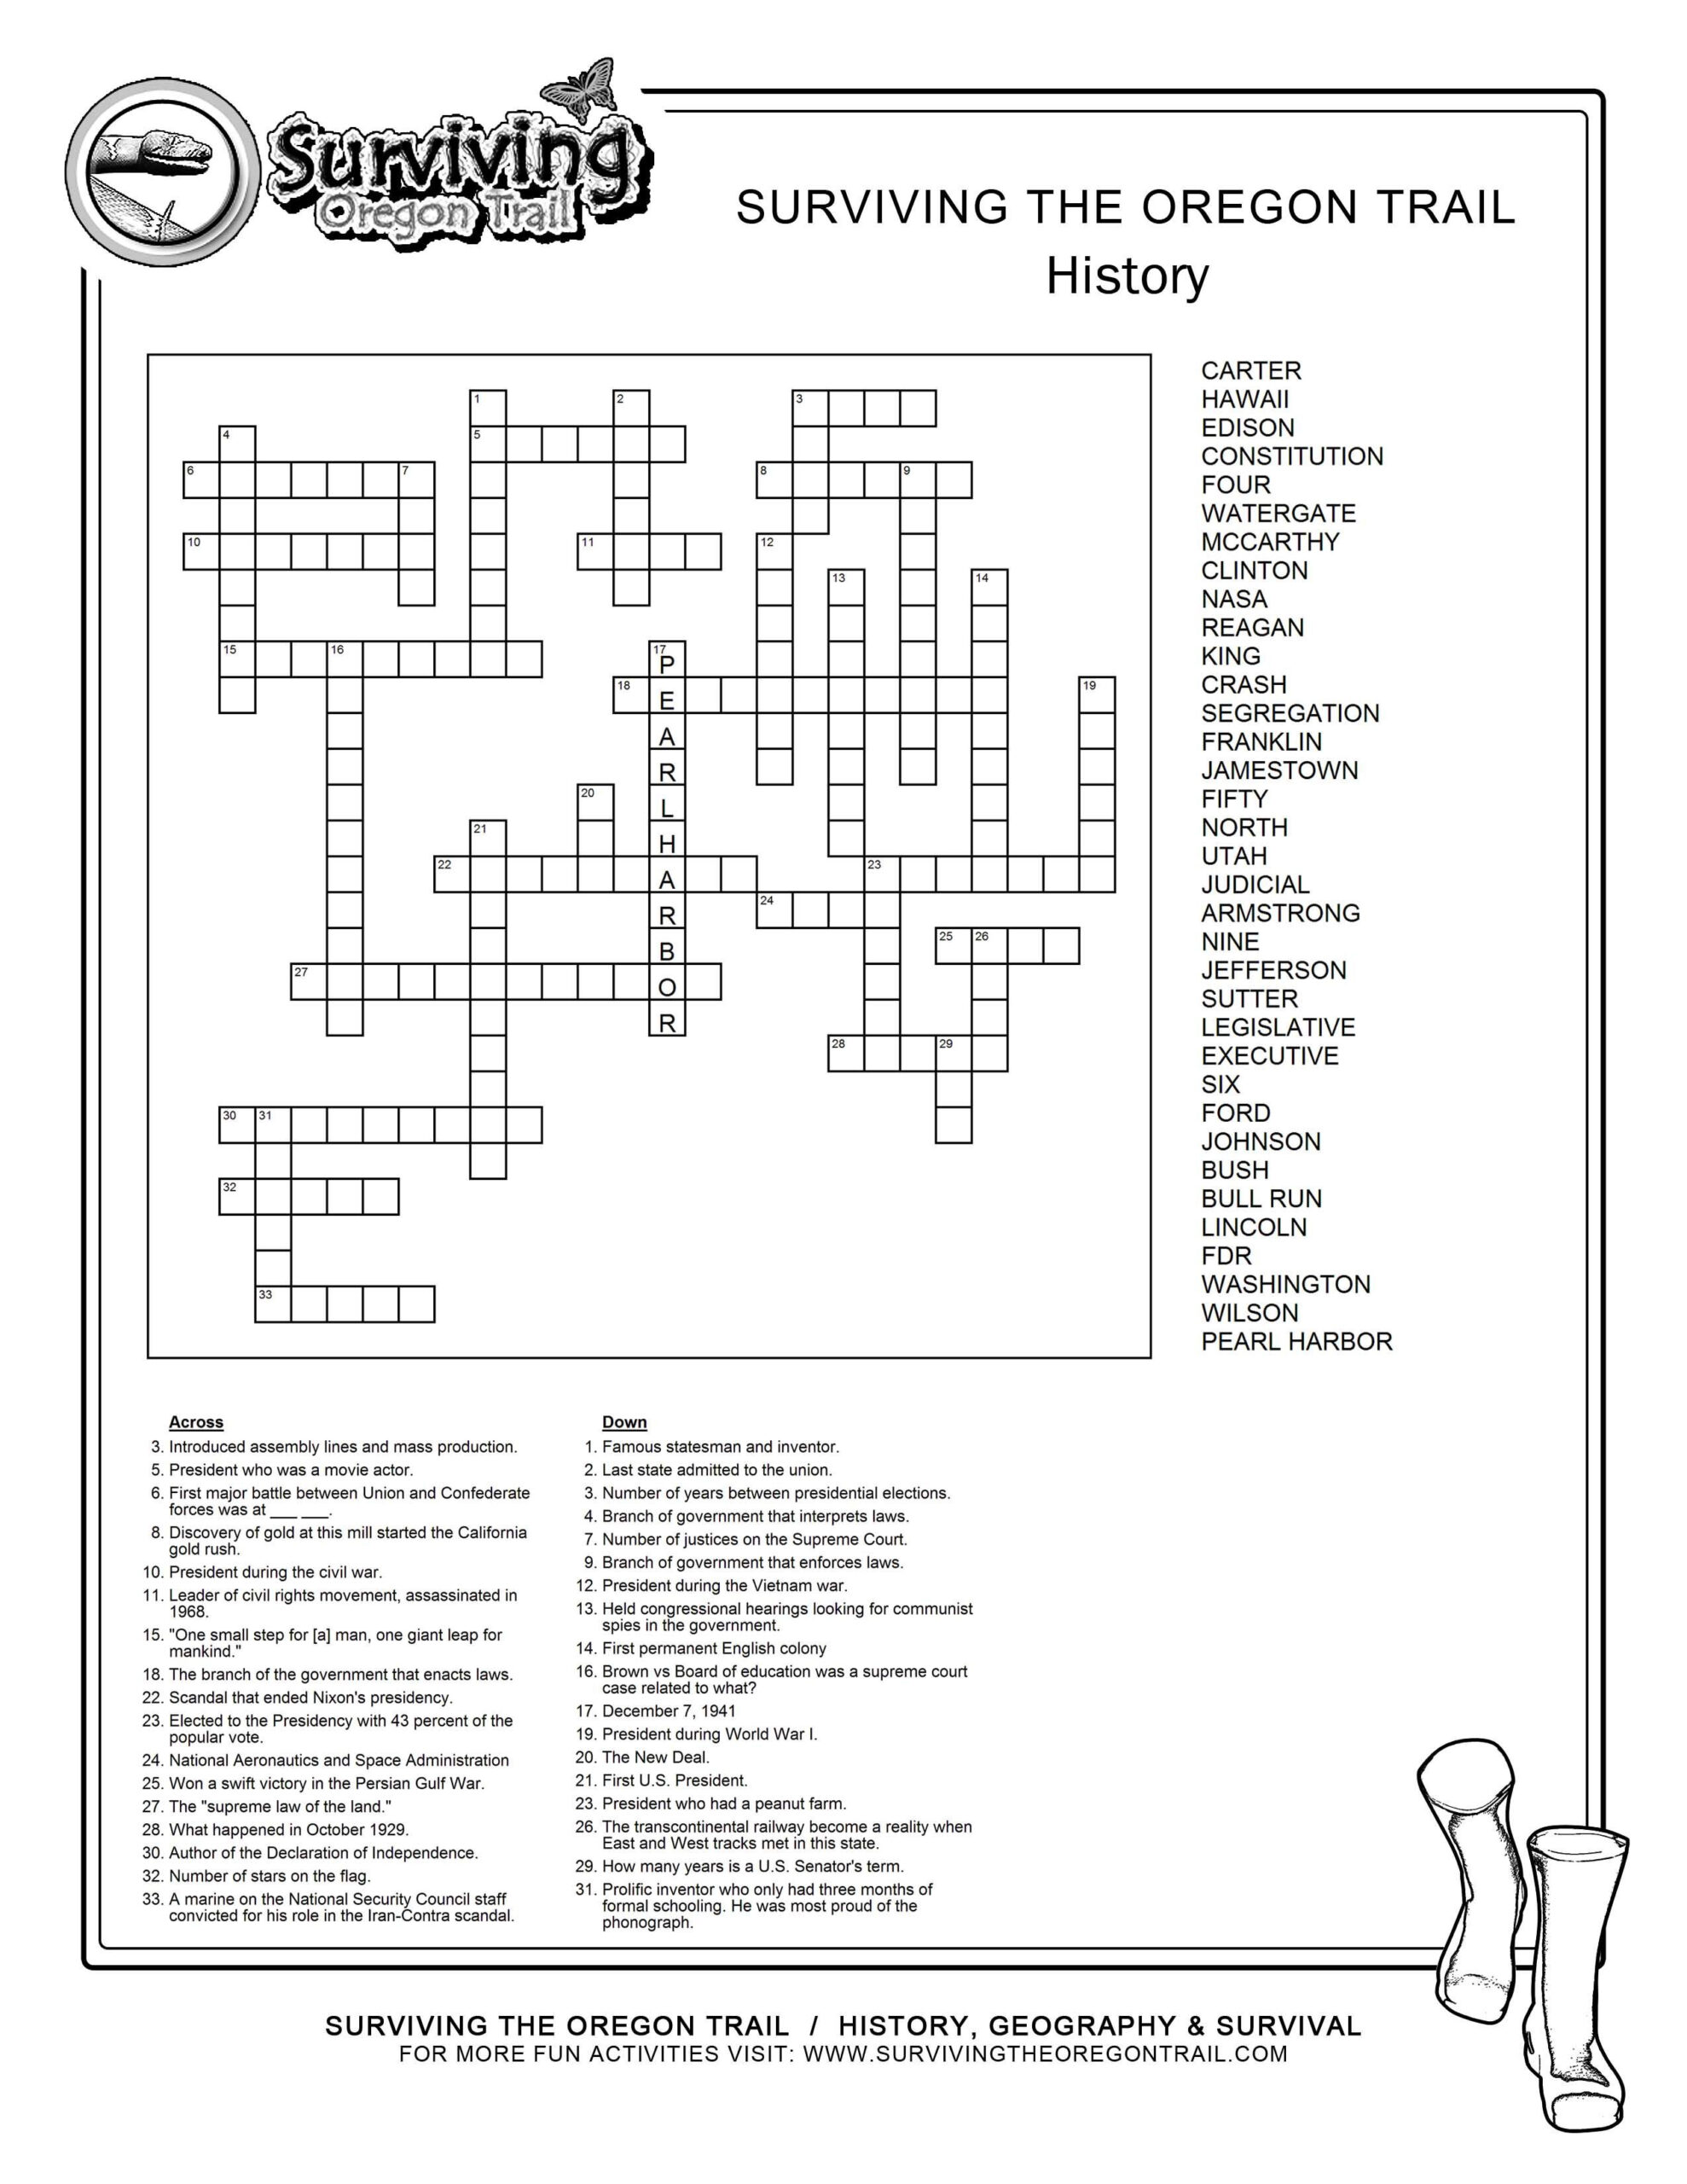 Fill Free To Save This Historical Crossword Puzzle To Your Computer 